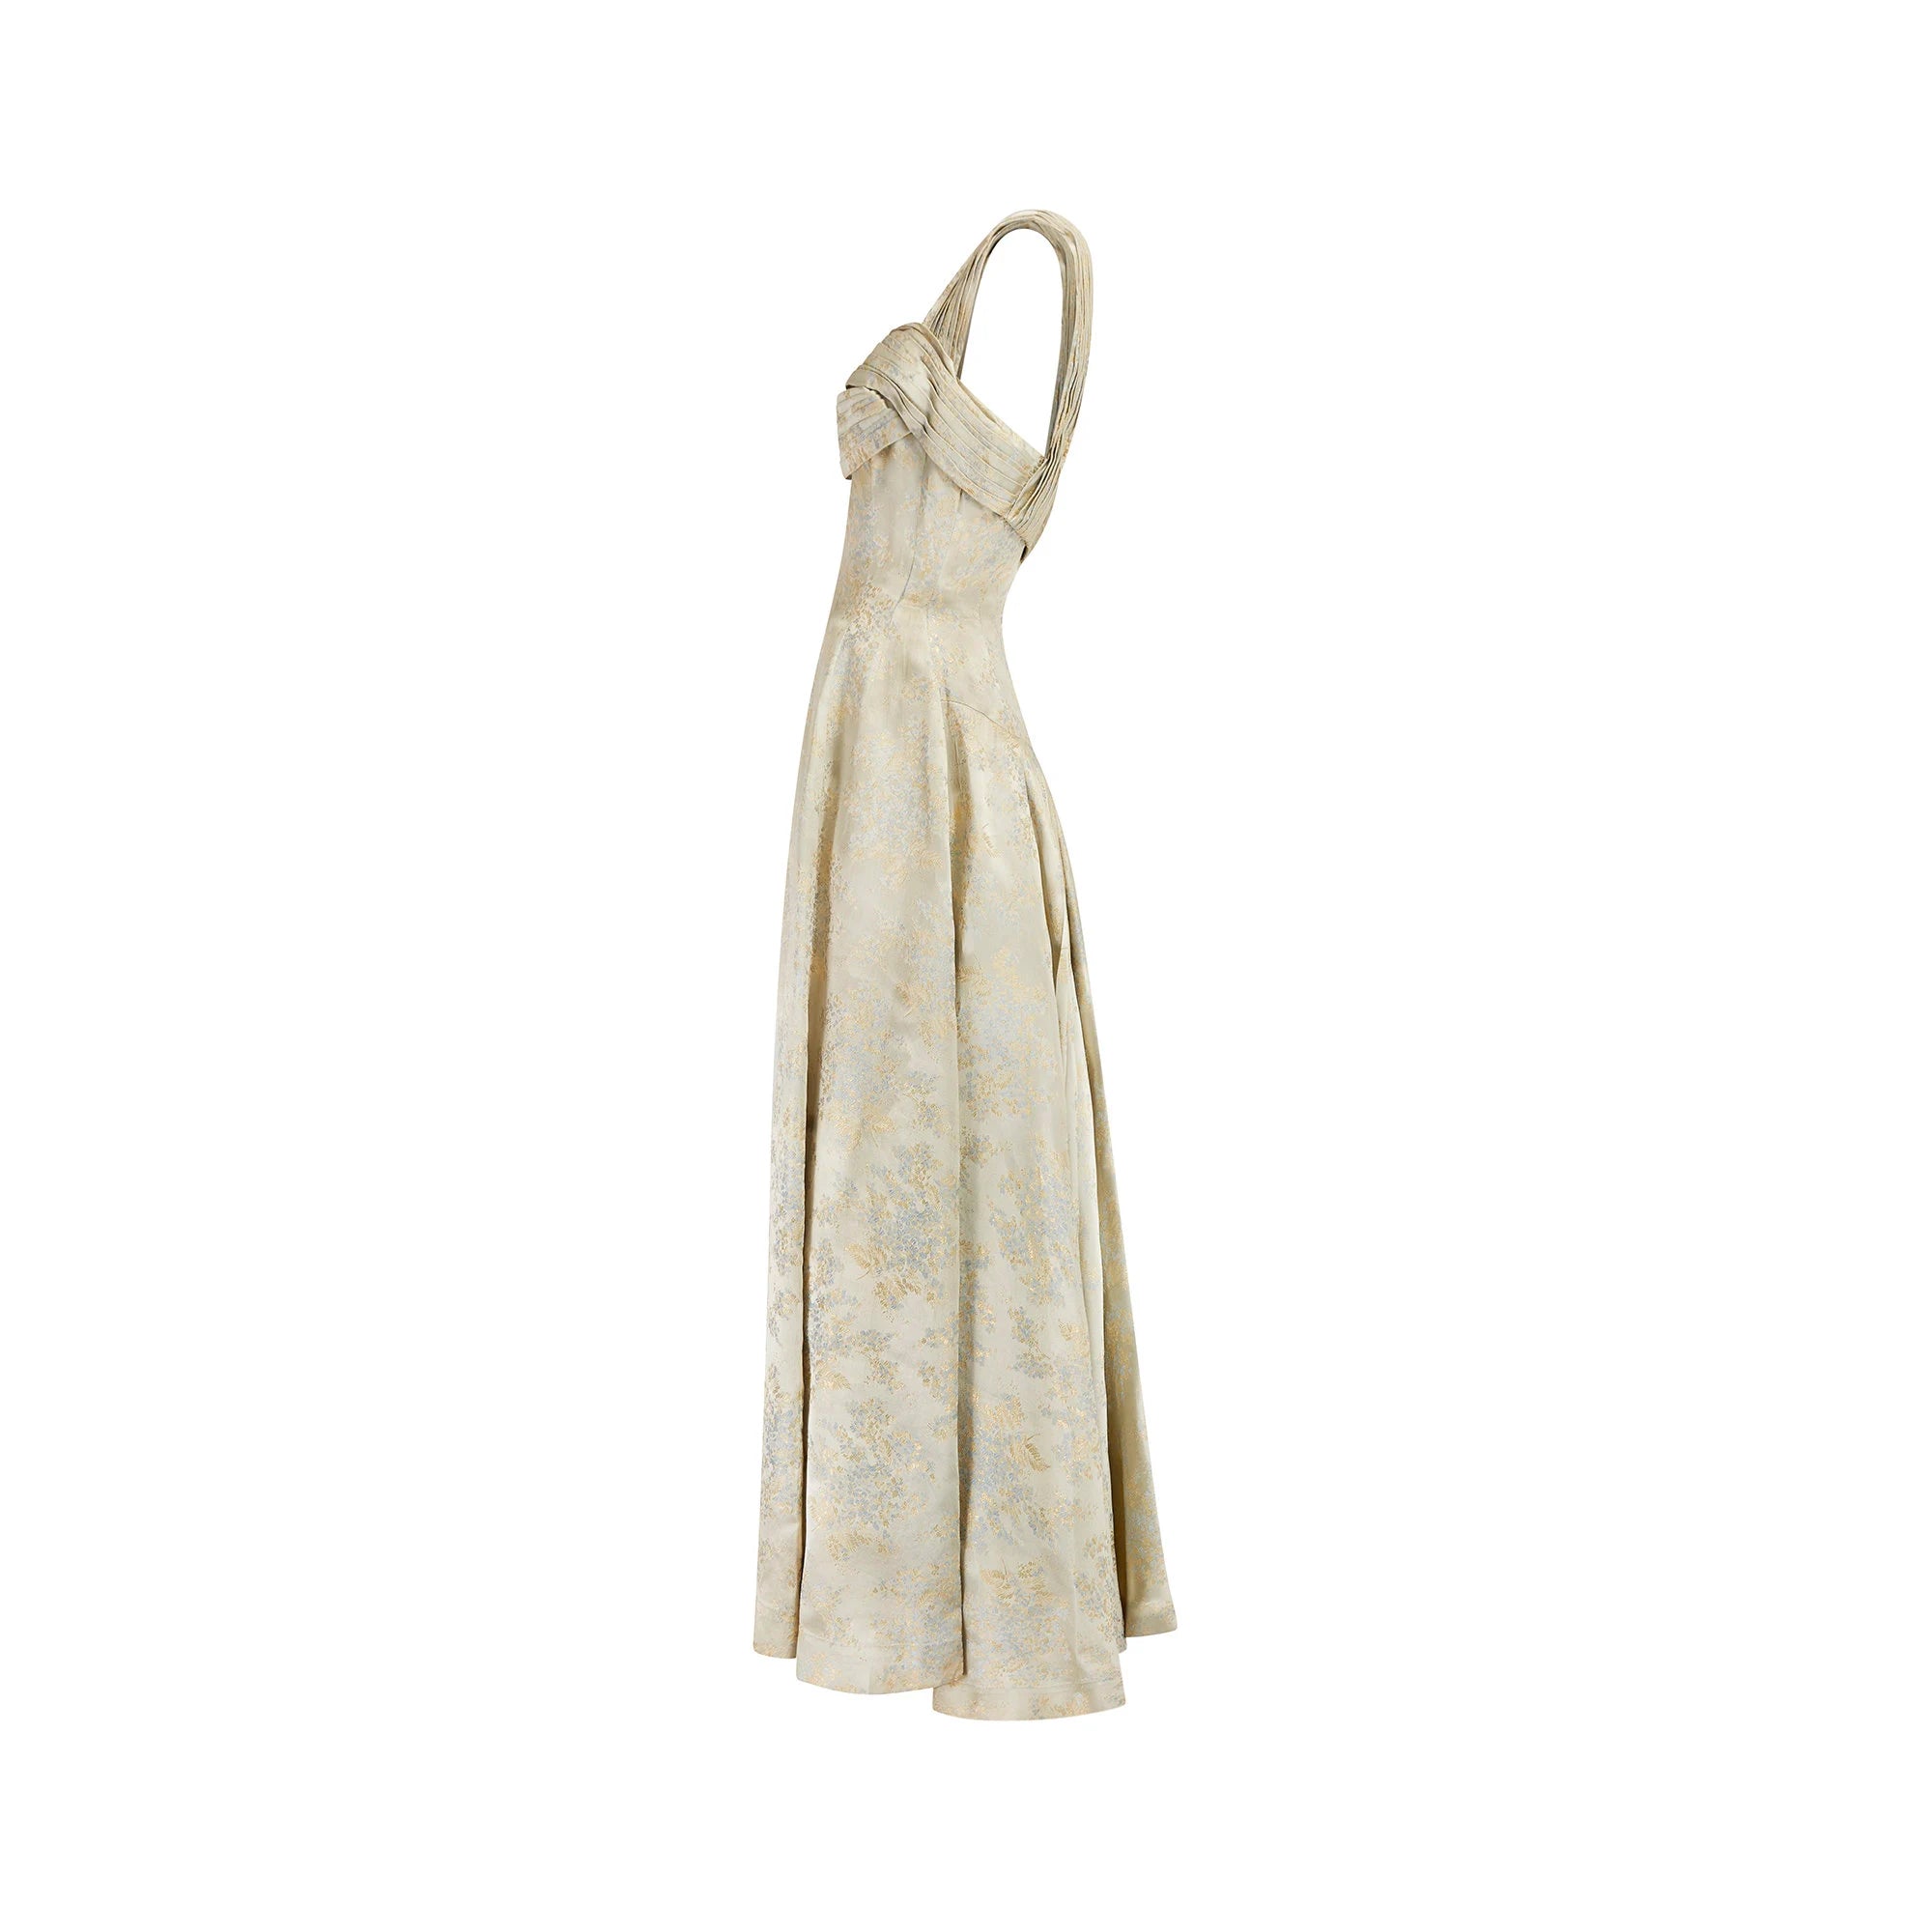 ARCHIVE - 1950s Pale Gold and Blue Brocade Ball Gown